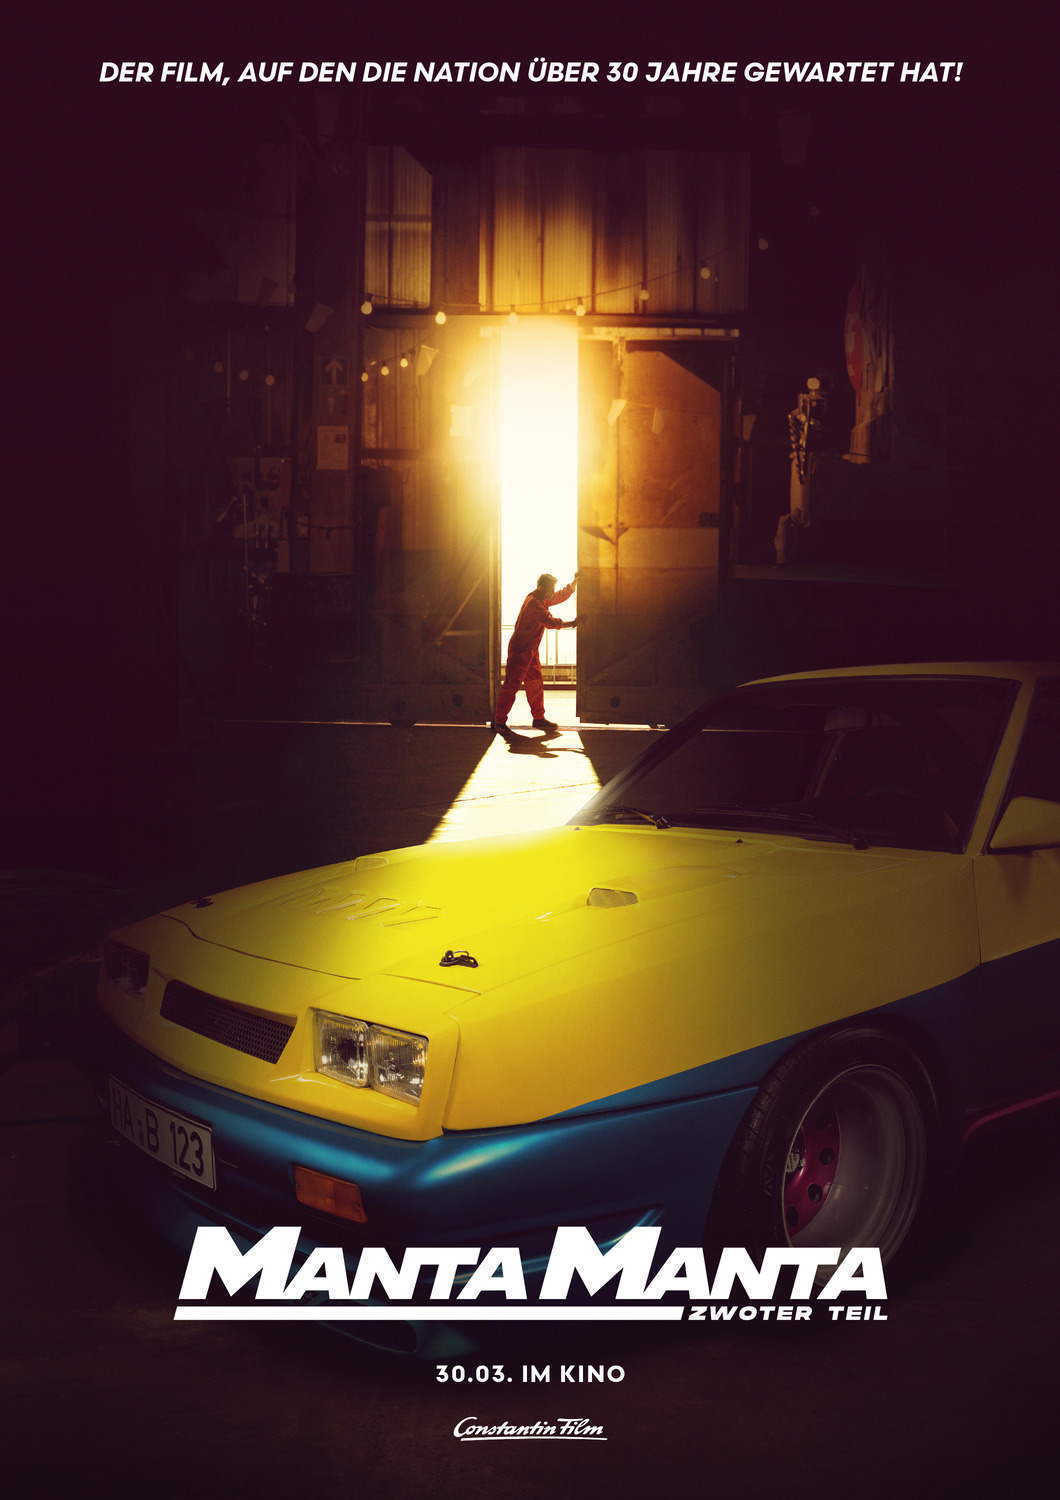 Extra Large Movie Poster Image for Manta, Manta - Zwoter Teil (#4 of 5)